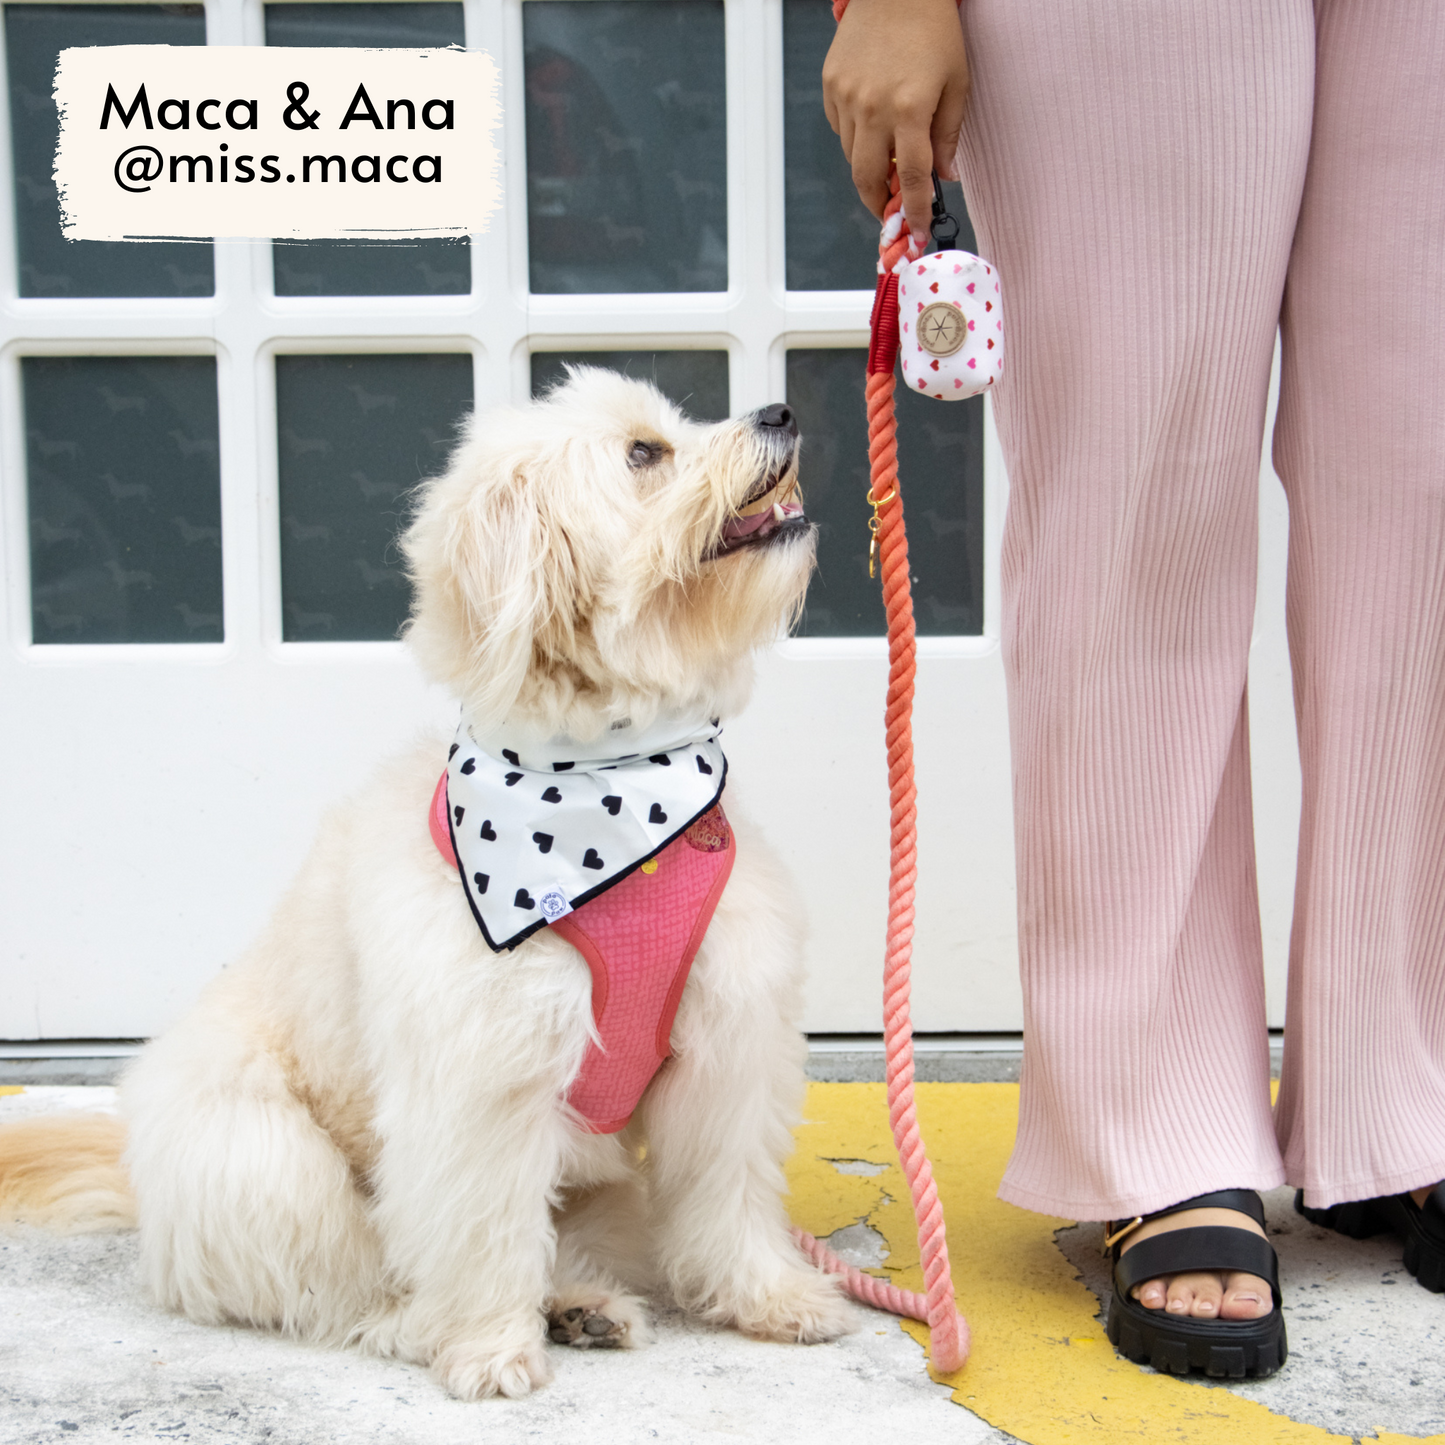 Miss Maca, fluffy dog influencer, wearing Pata Paw's Blush Harness and Blush Rope Leash